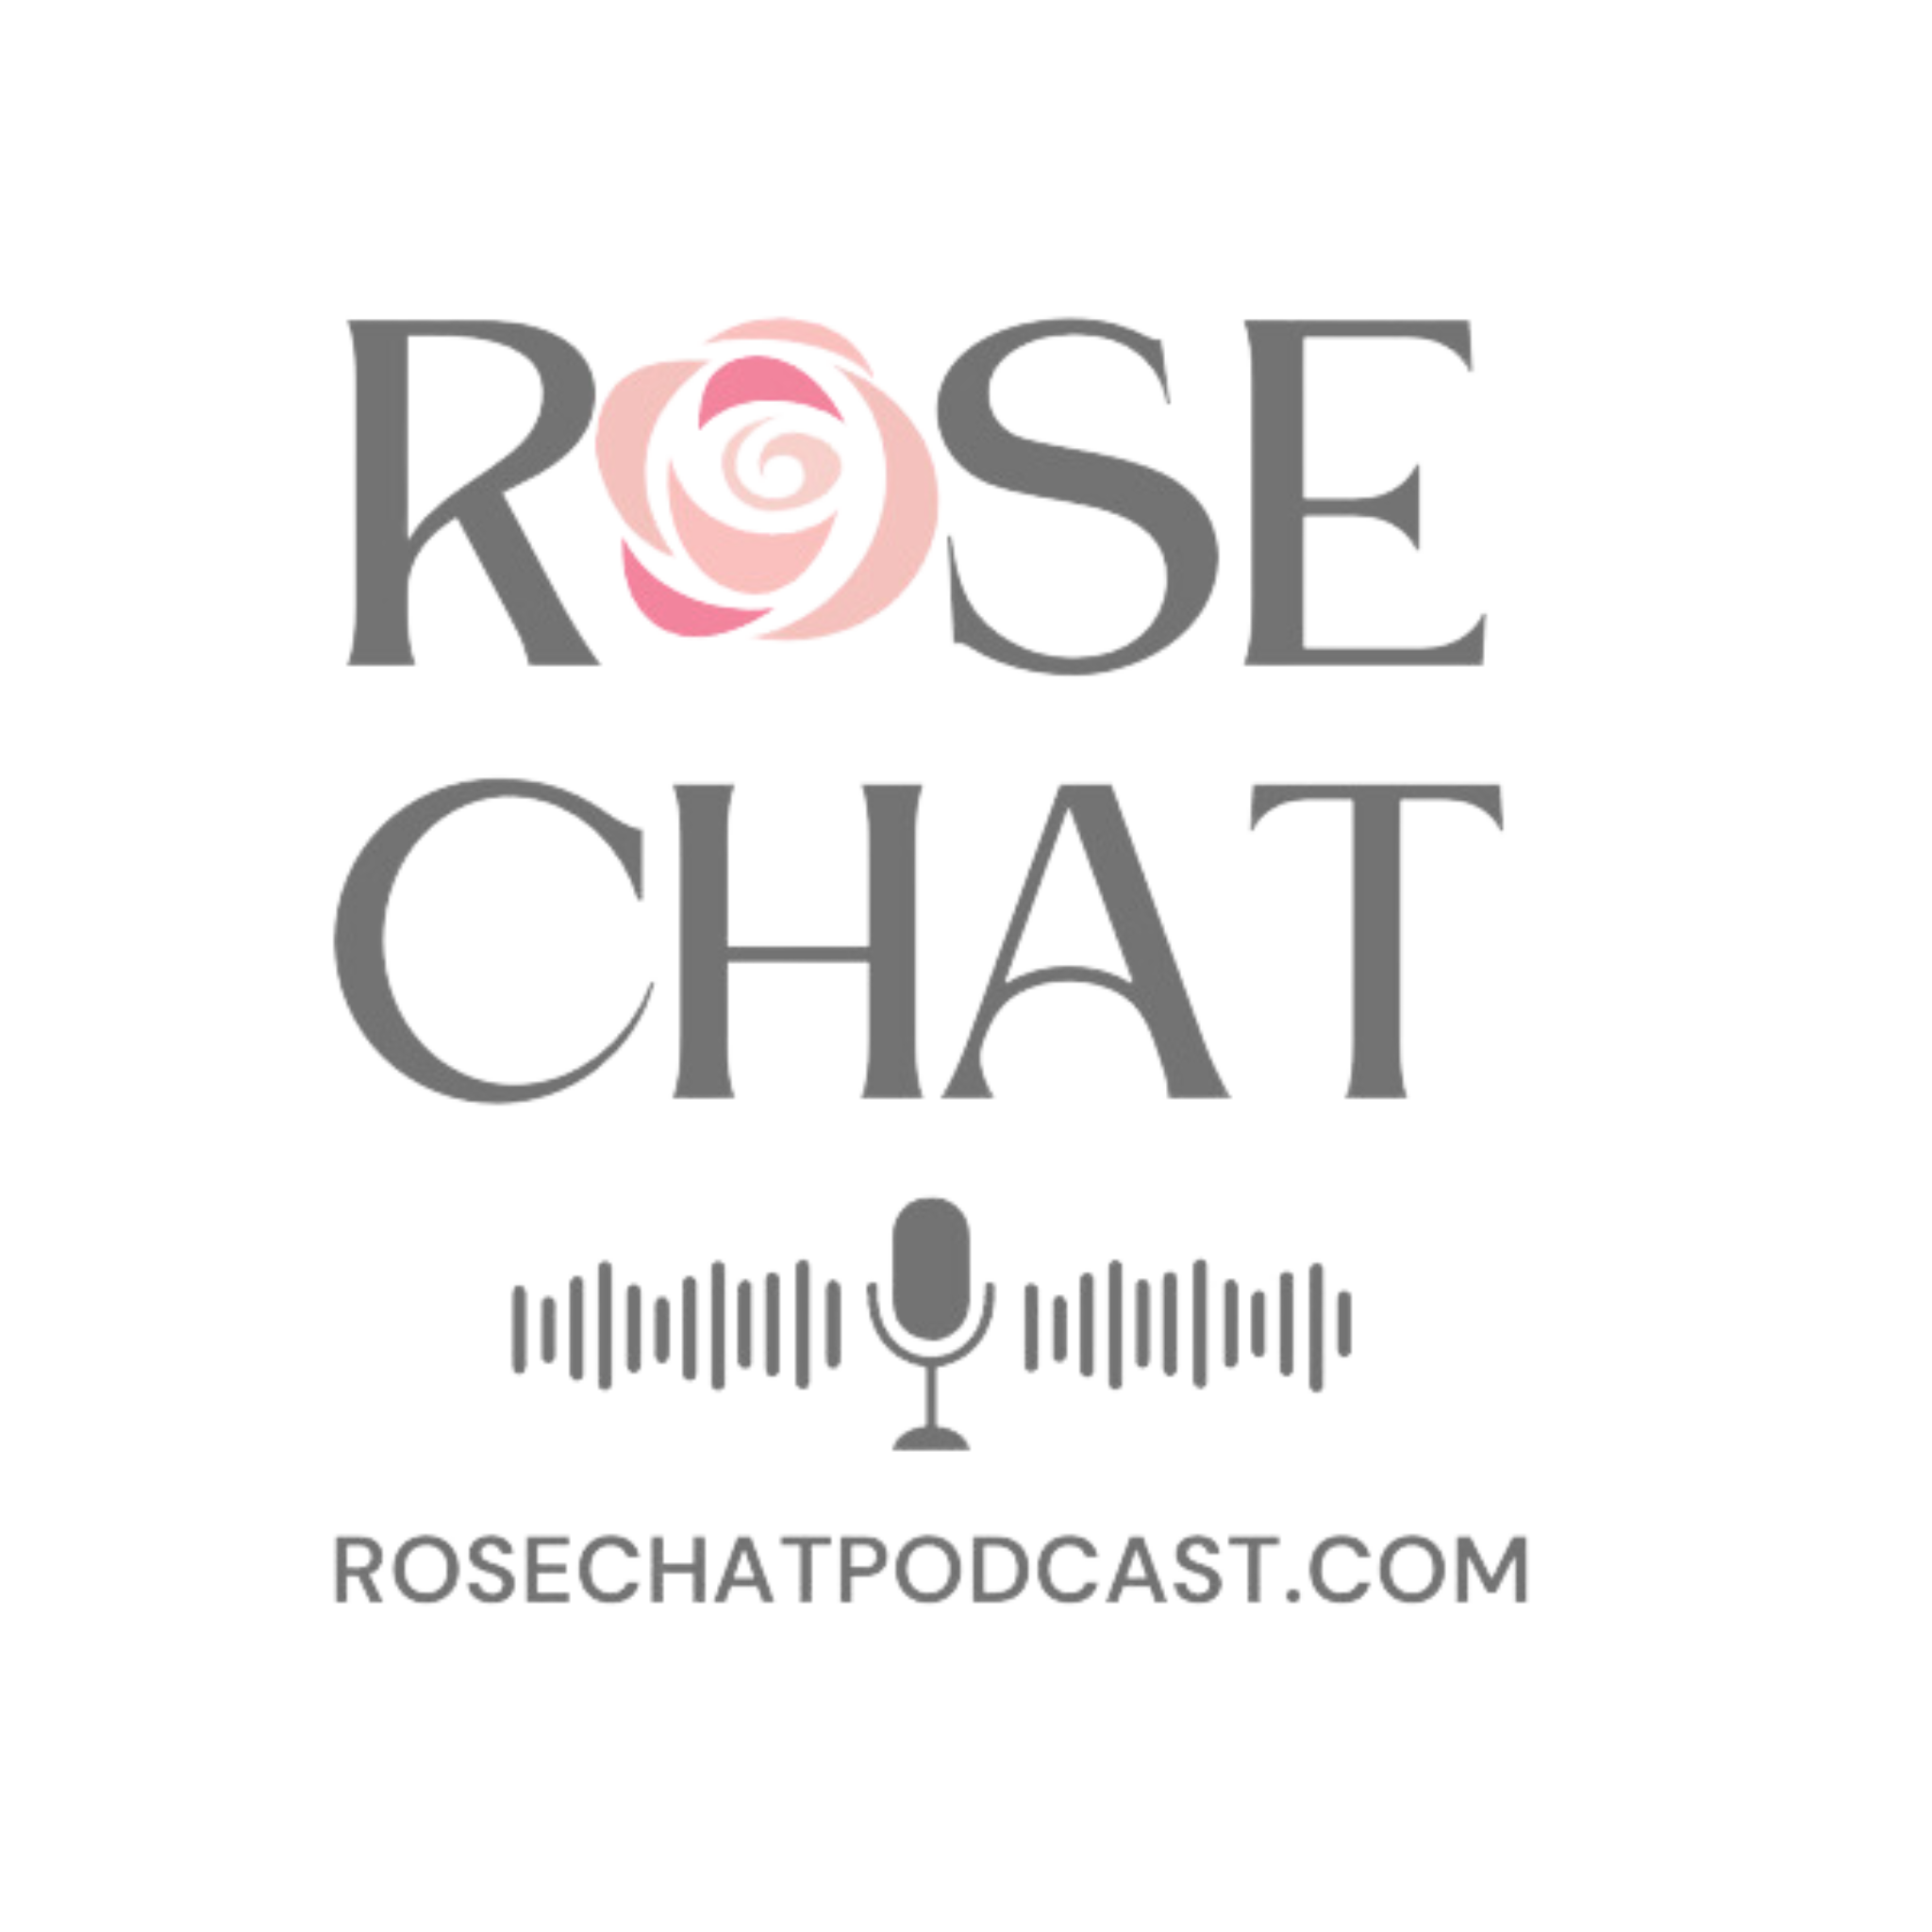 Rose Chat Podcast